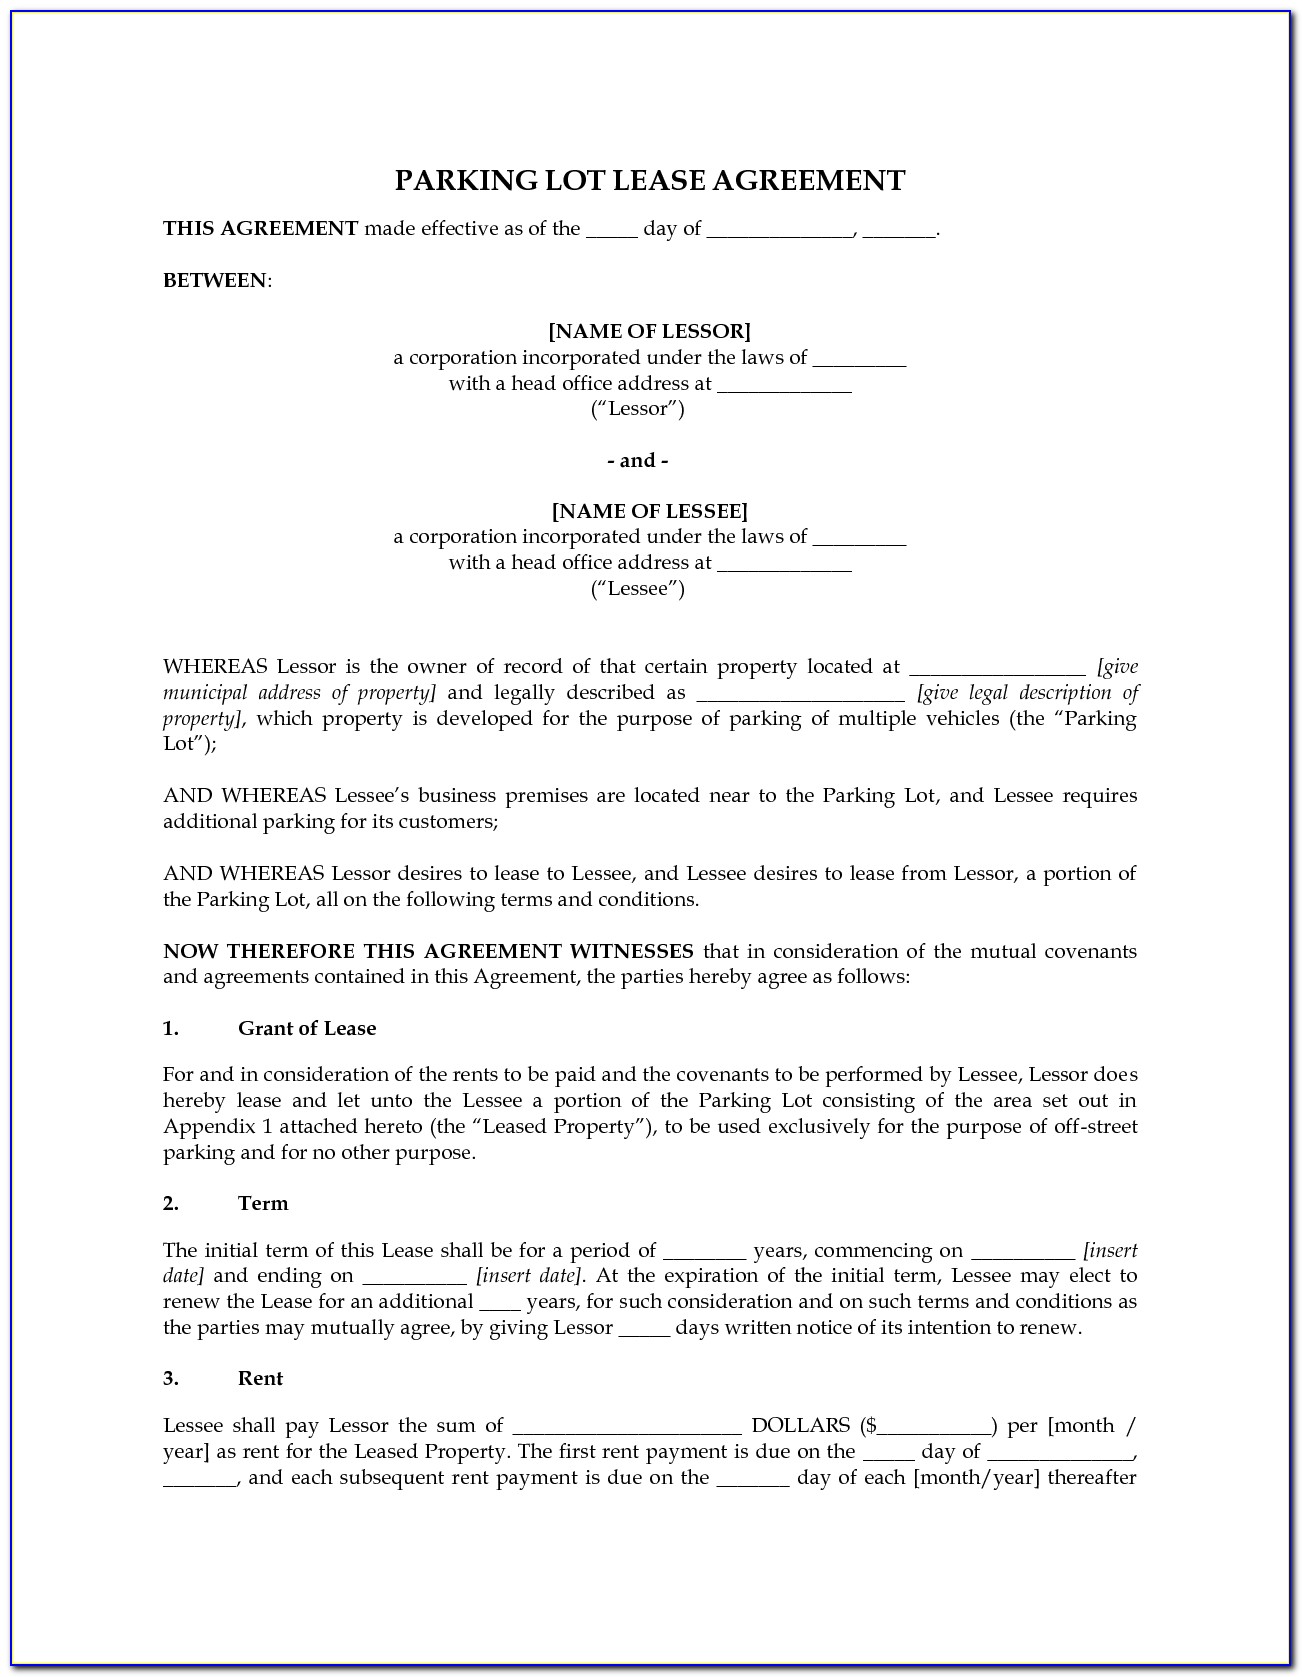 Parking Lot Lease Agreement Template